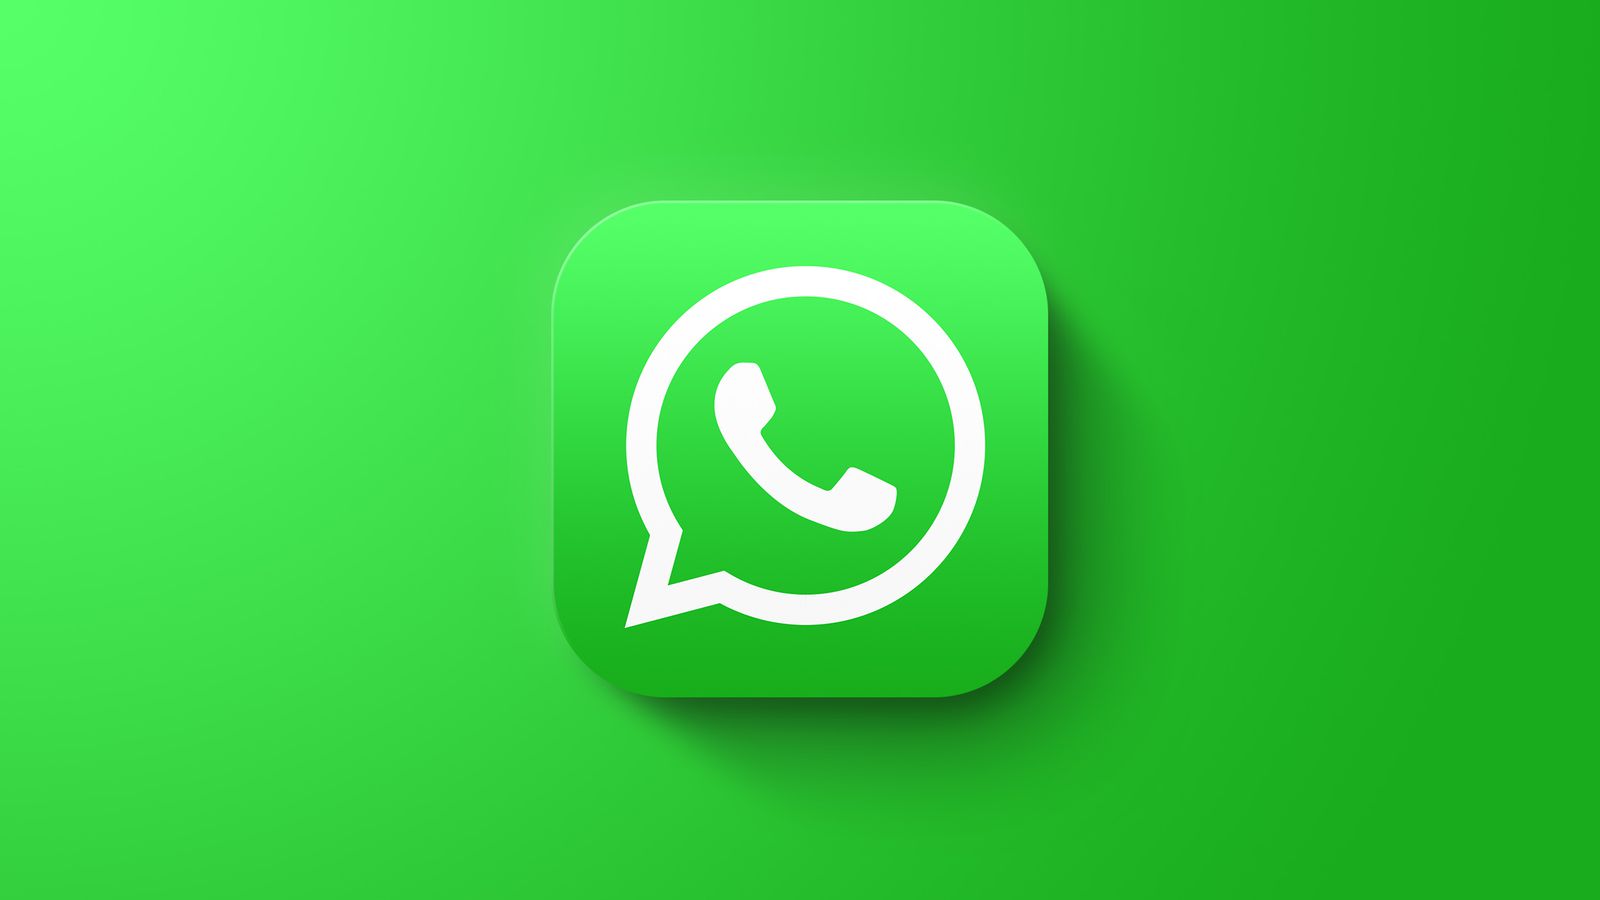 The Latest WhatsApp version makes it simpler to restrict who can join your group